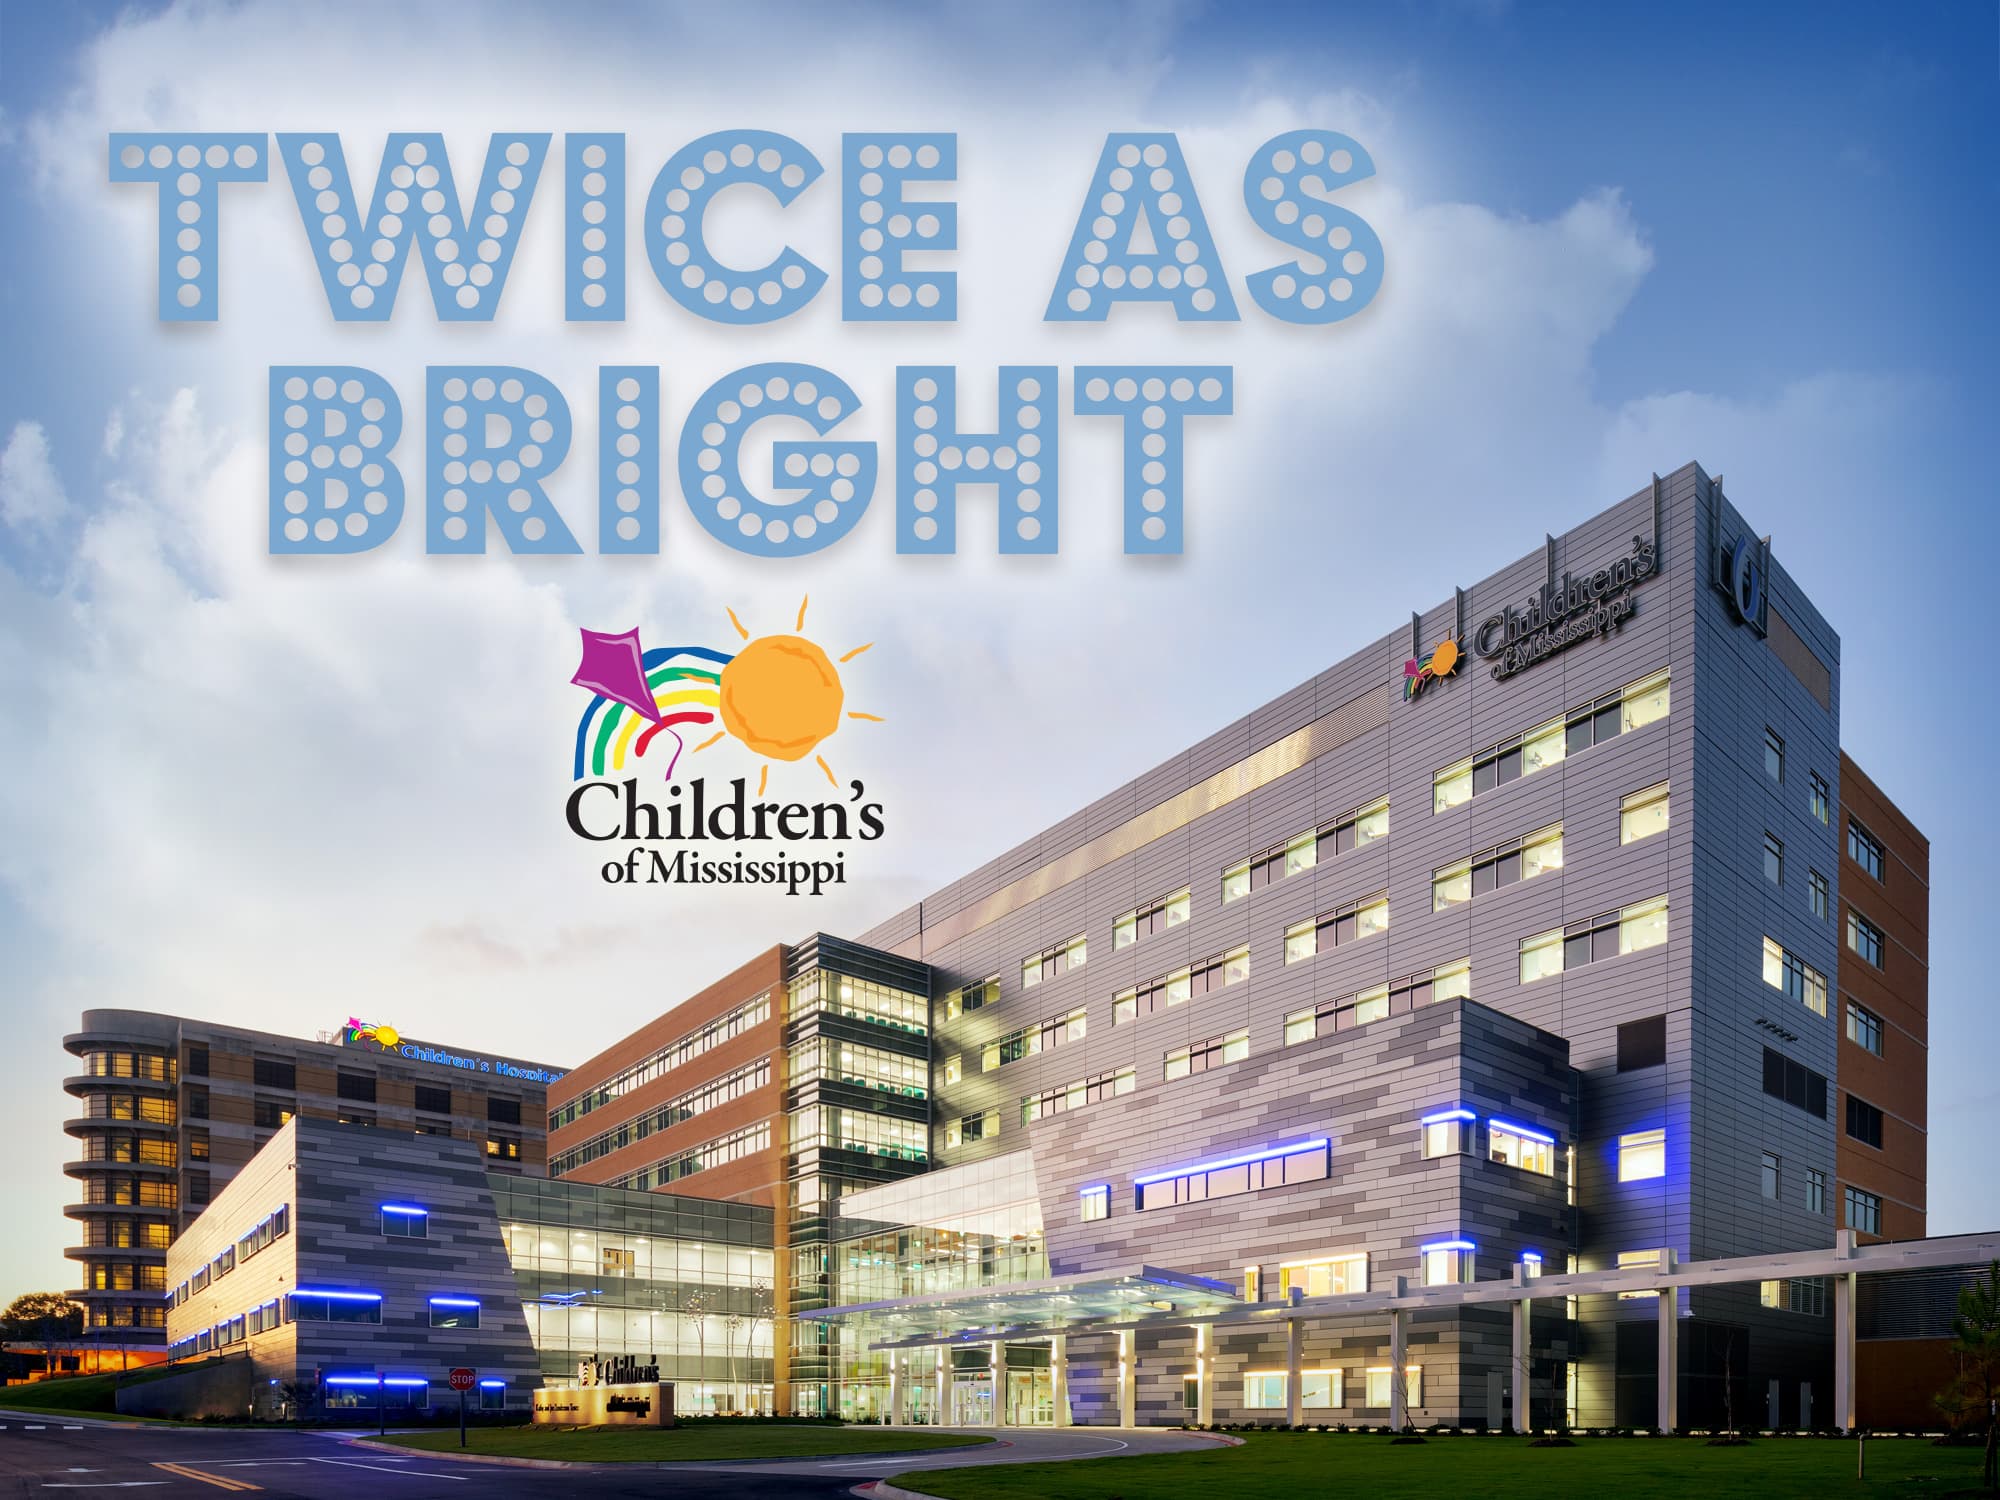 Twice as Bright doubles April gifts to Children's campaign